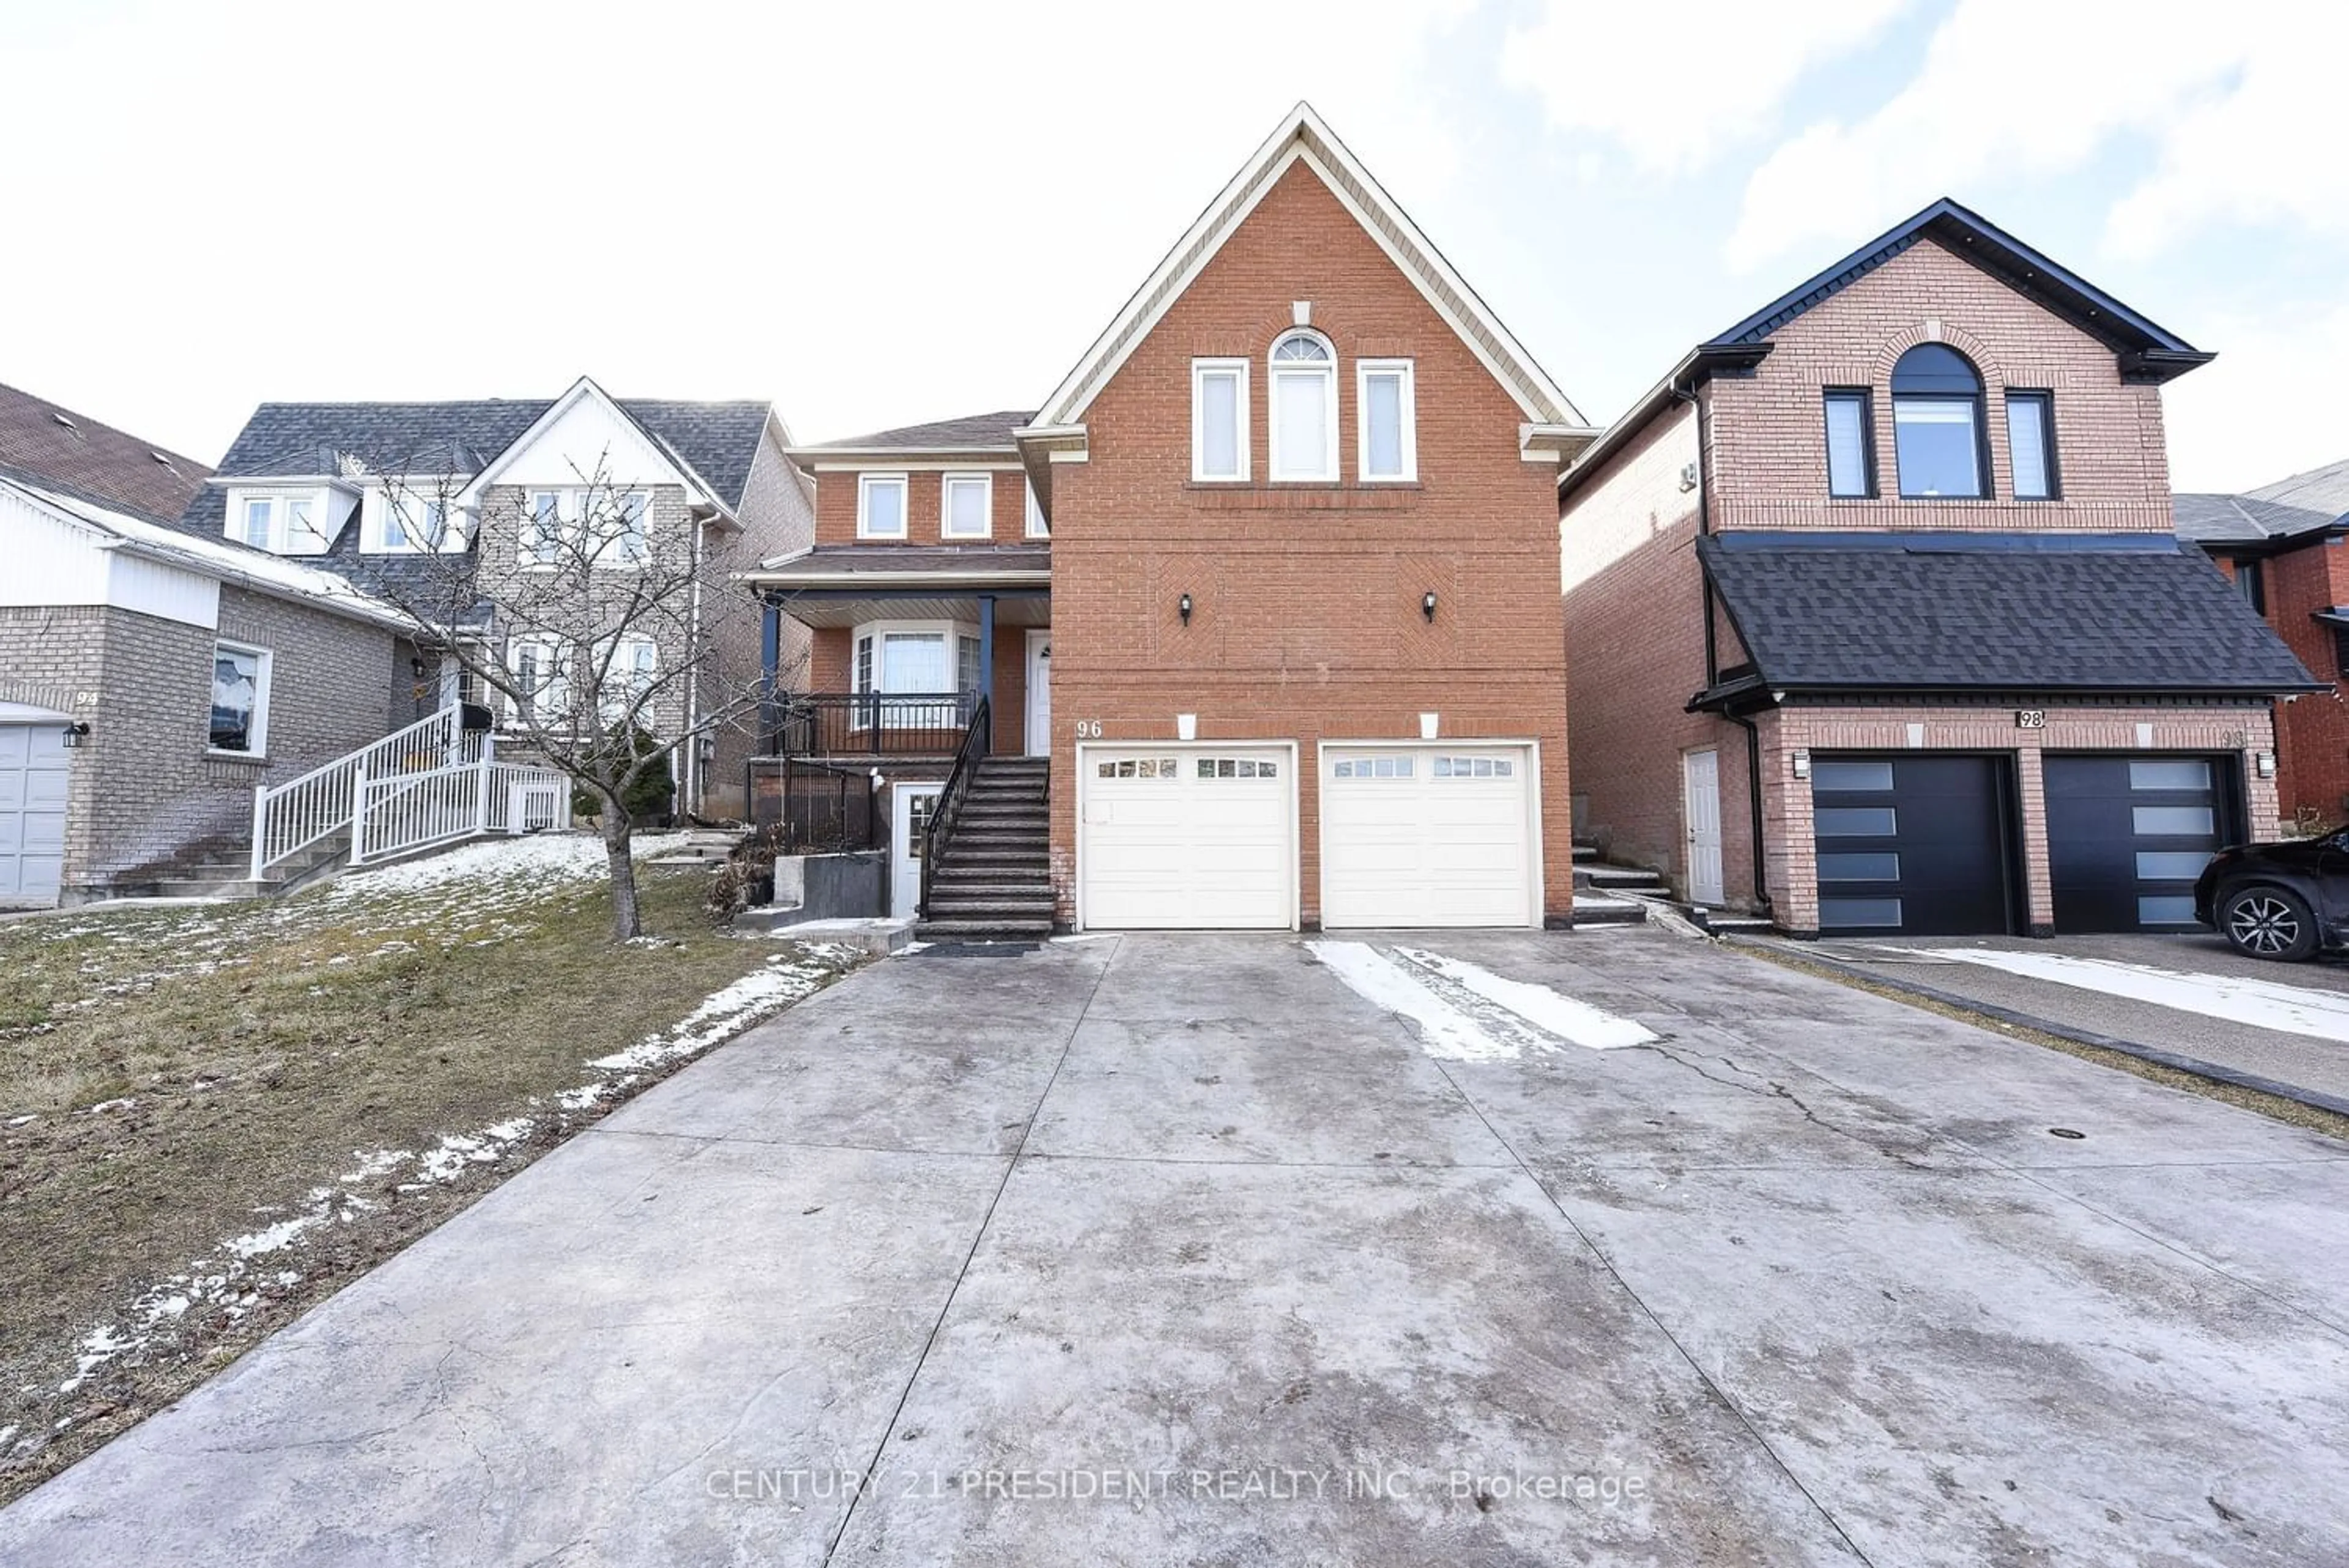 Frontside or backside of a home for 96 Sal Circ, Brampton Ontario L6R 1H5